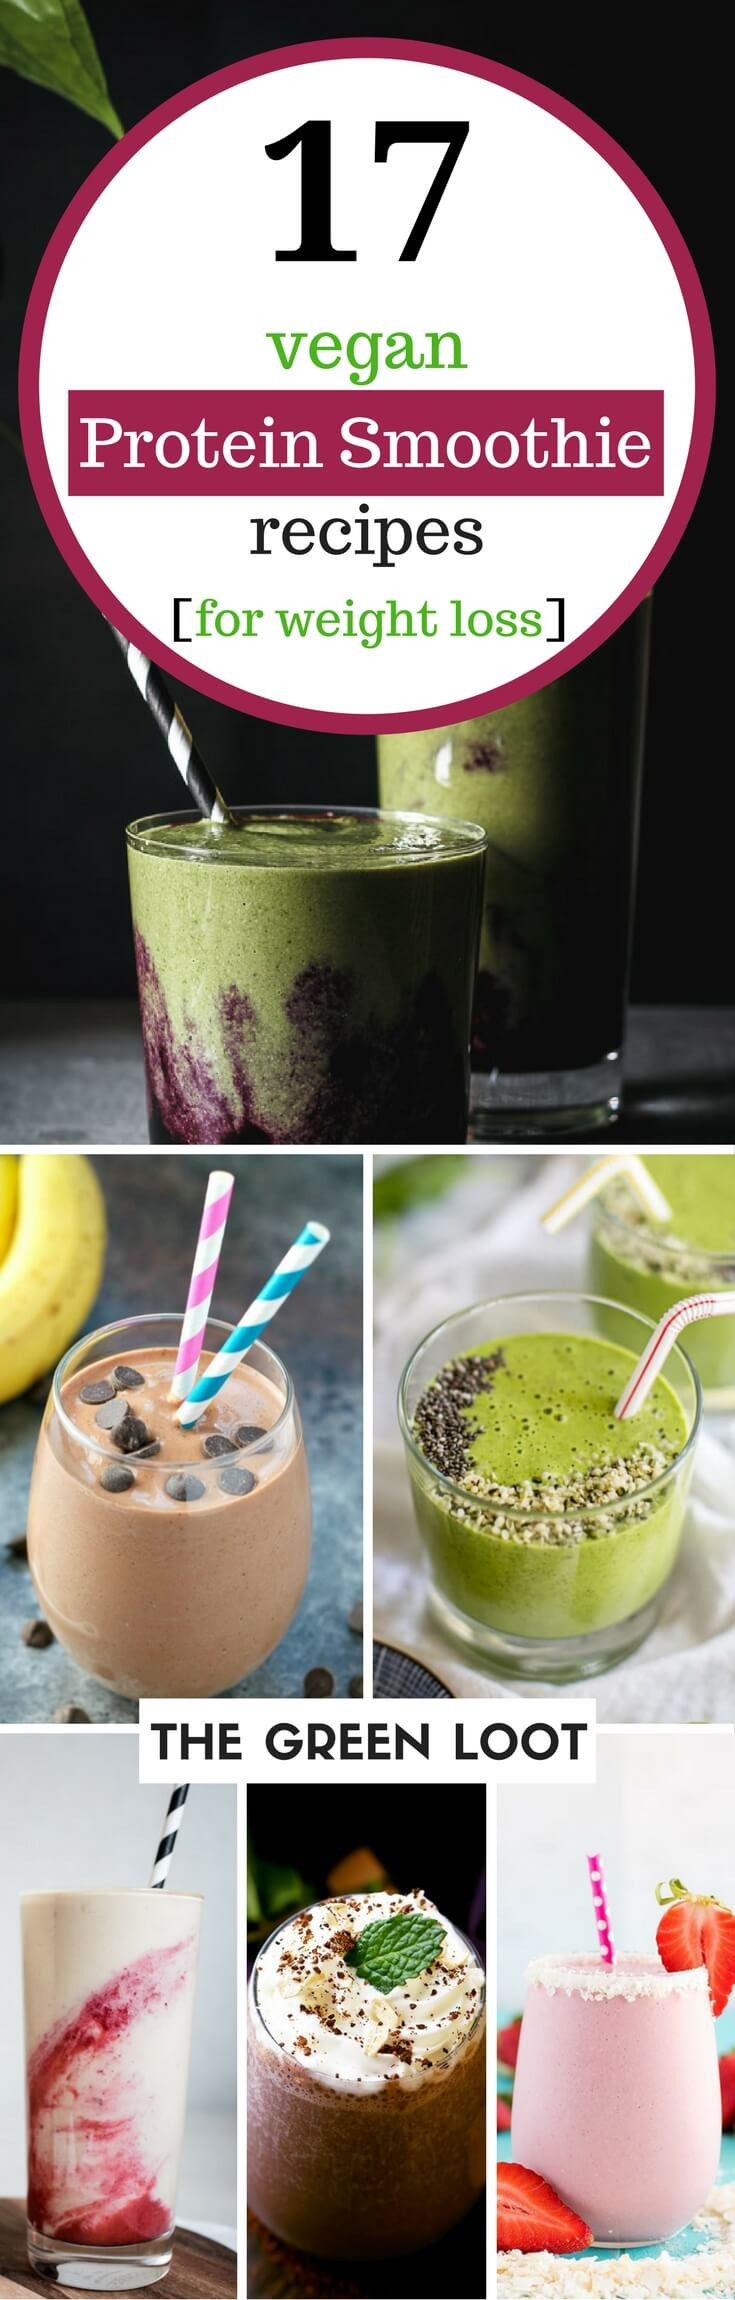 Vegetarian Protein Smoothies
 17 Tasty Vegan Protein Smoothie Recipes for Weight Loss